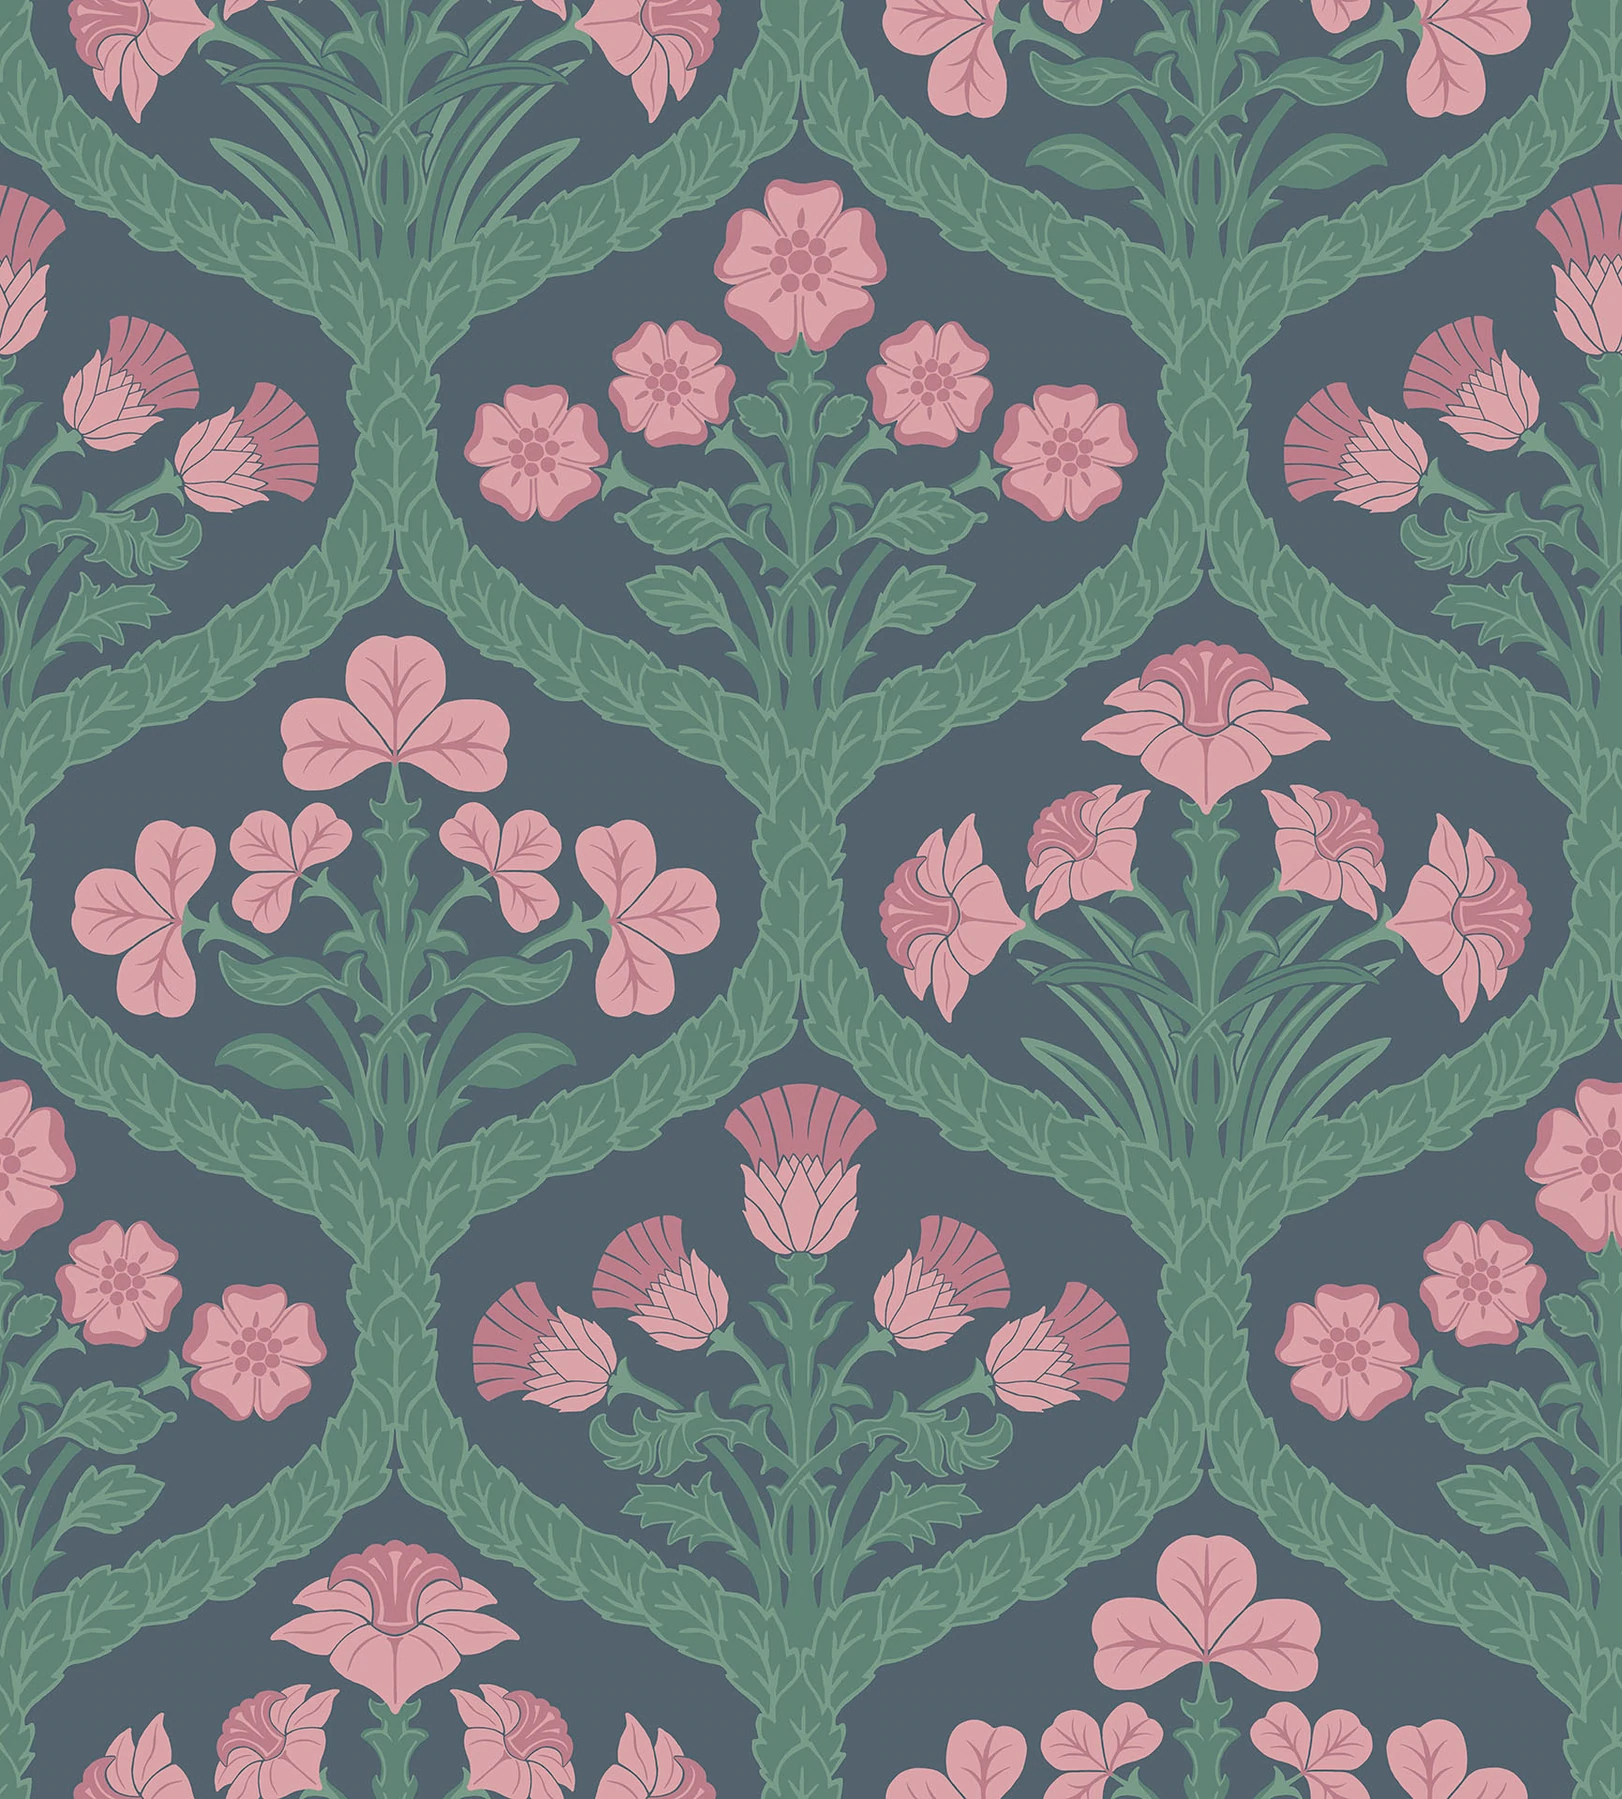 Floral Kingdom Tapete - 116/3010 - Cole&Son - The Pearwood Collection